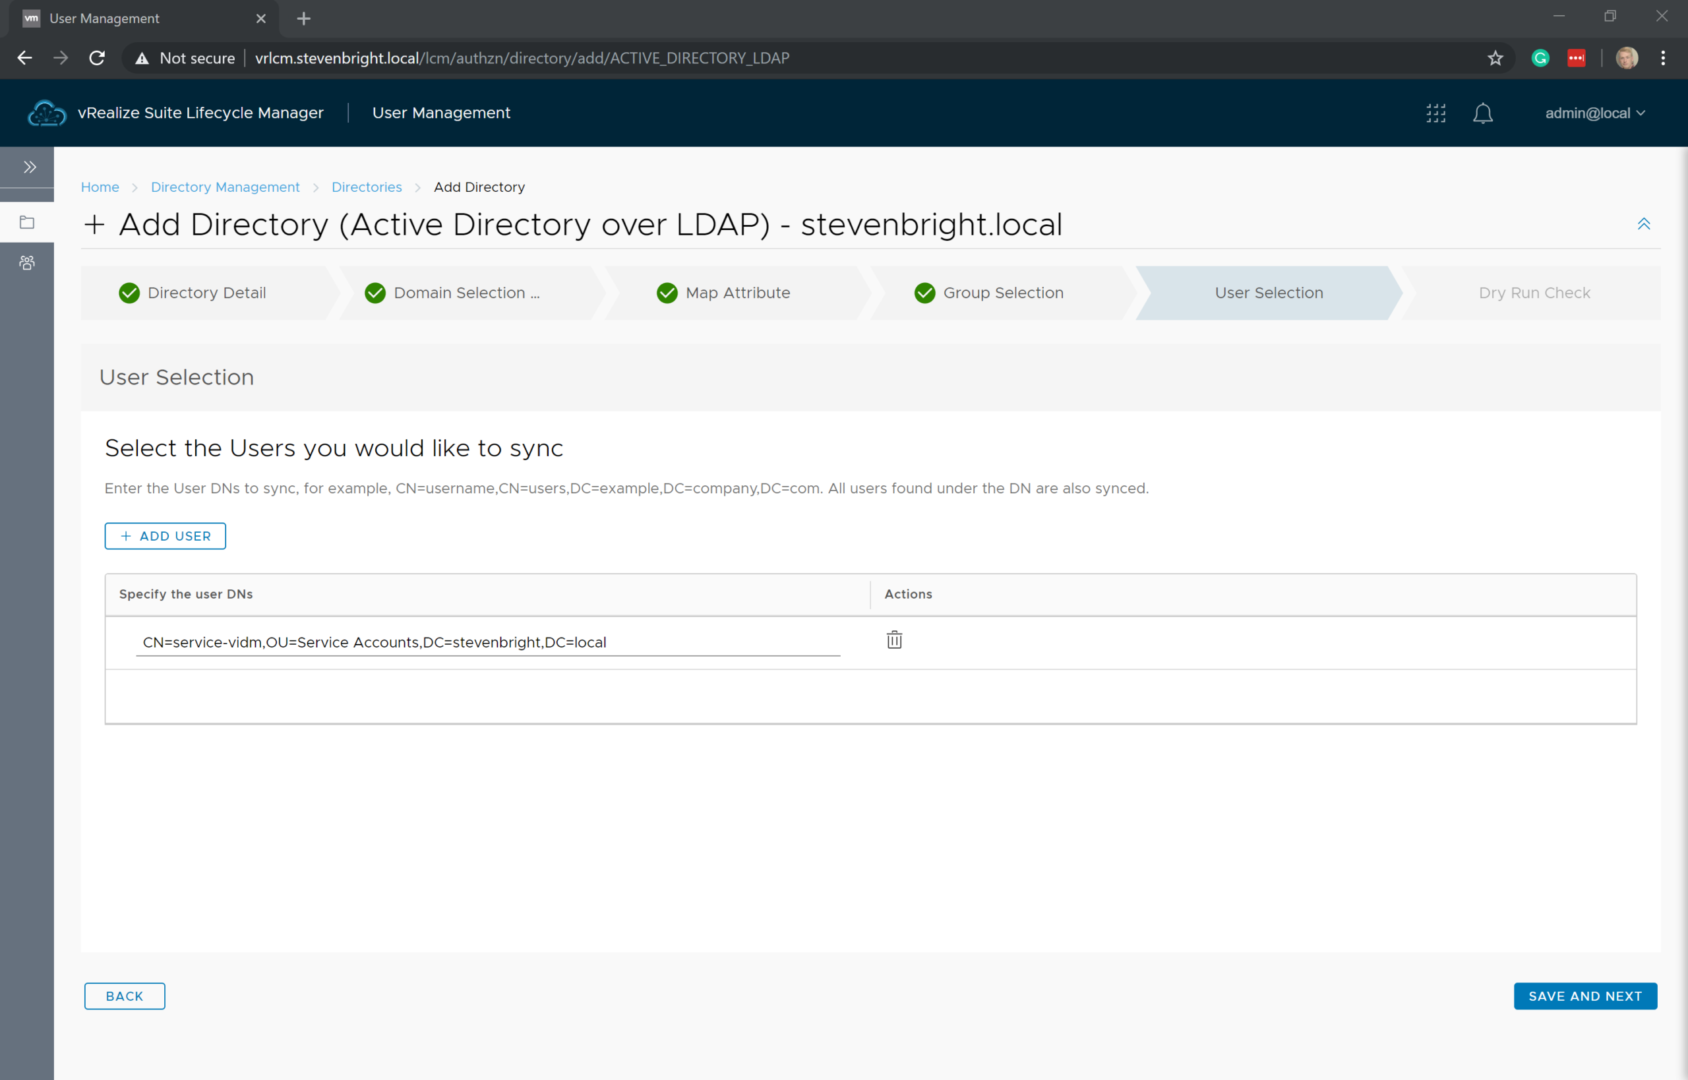 vRealize Suite Lifecycle Manager - User Management - Directory Management - Add Directory Wizard - User Selection